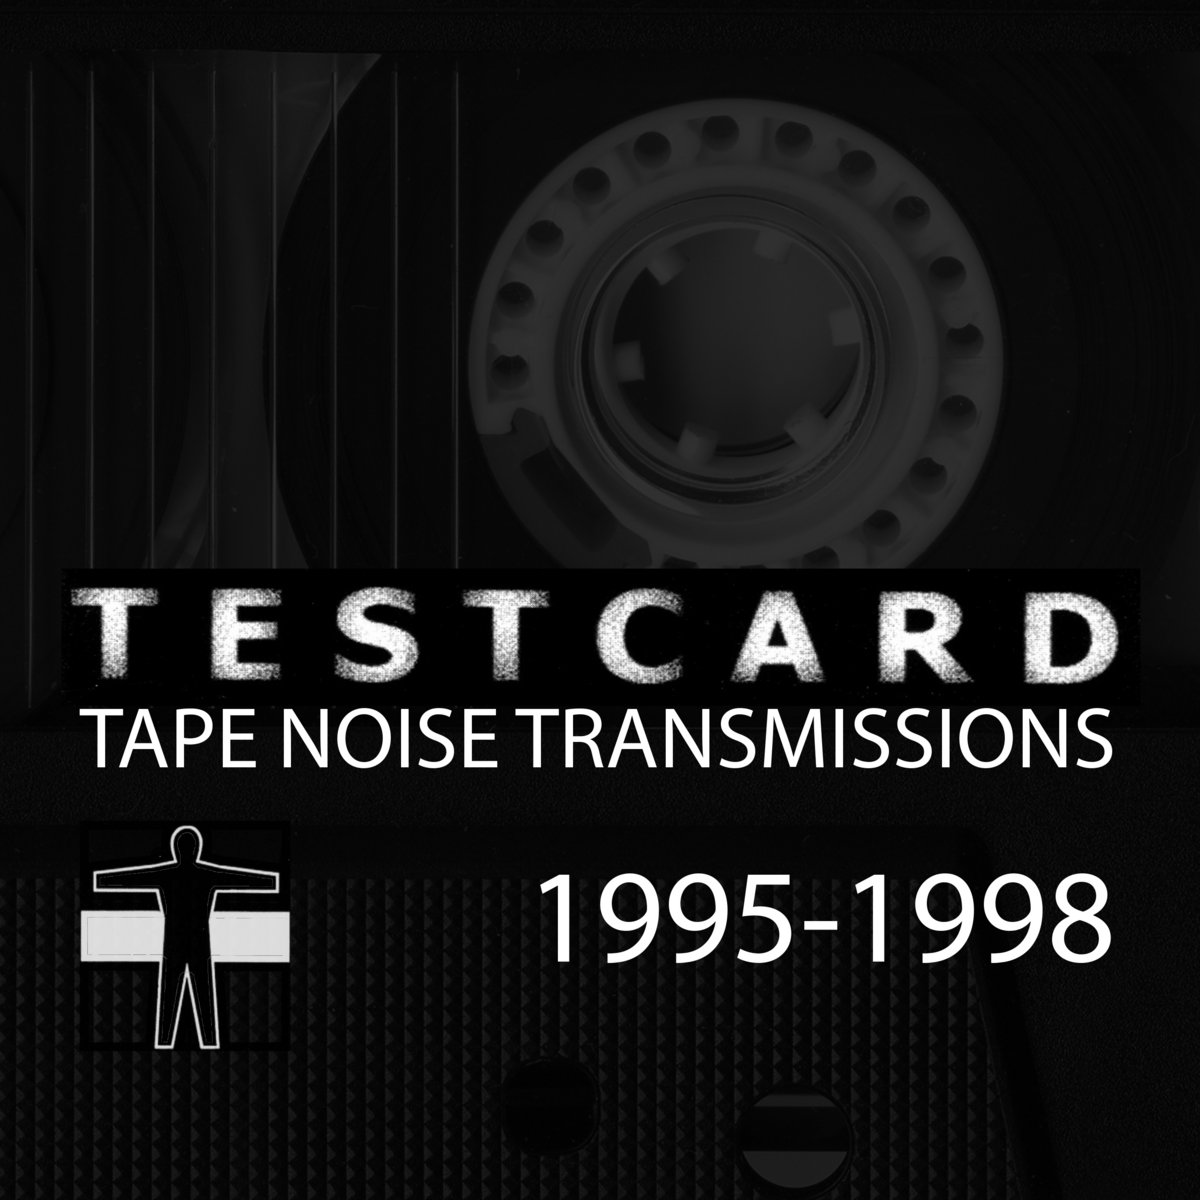 Tape Noise Transmissions